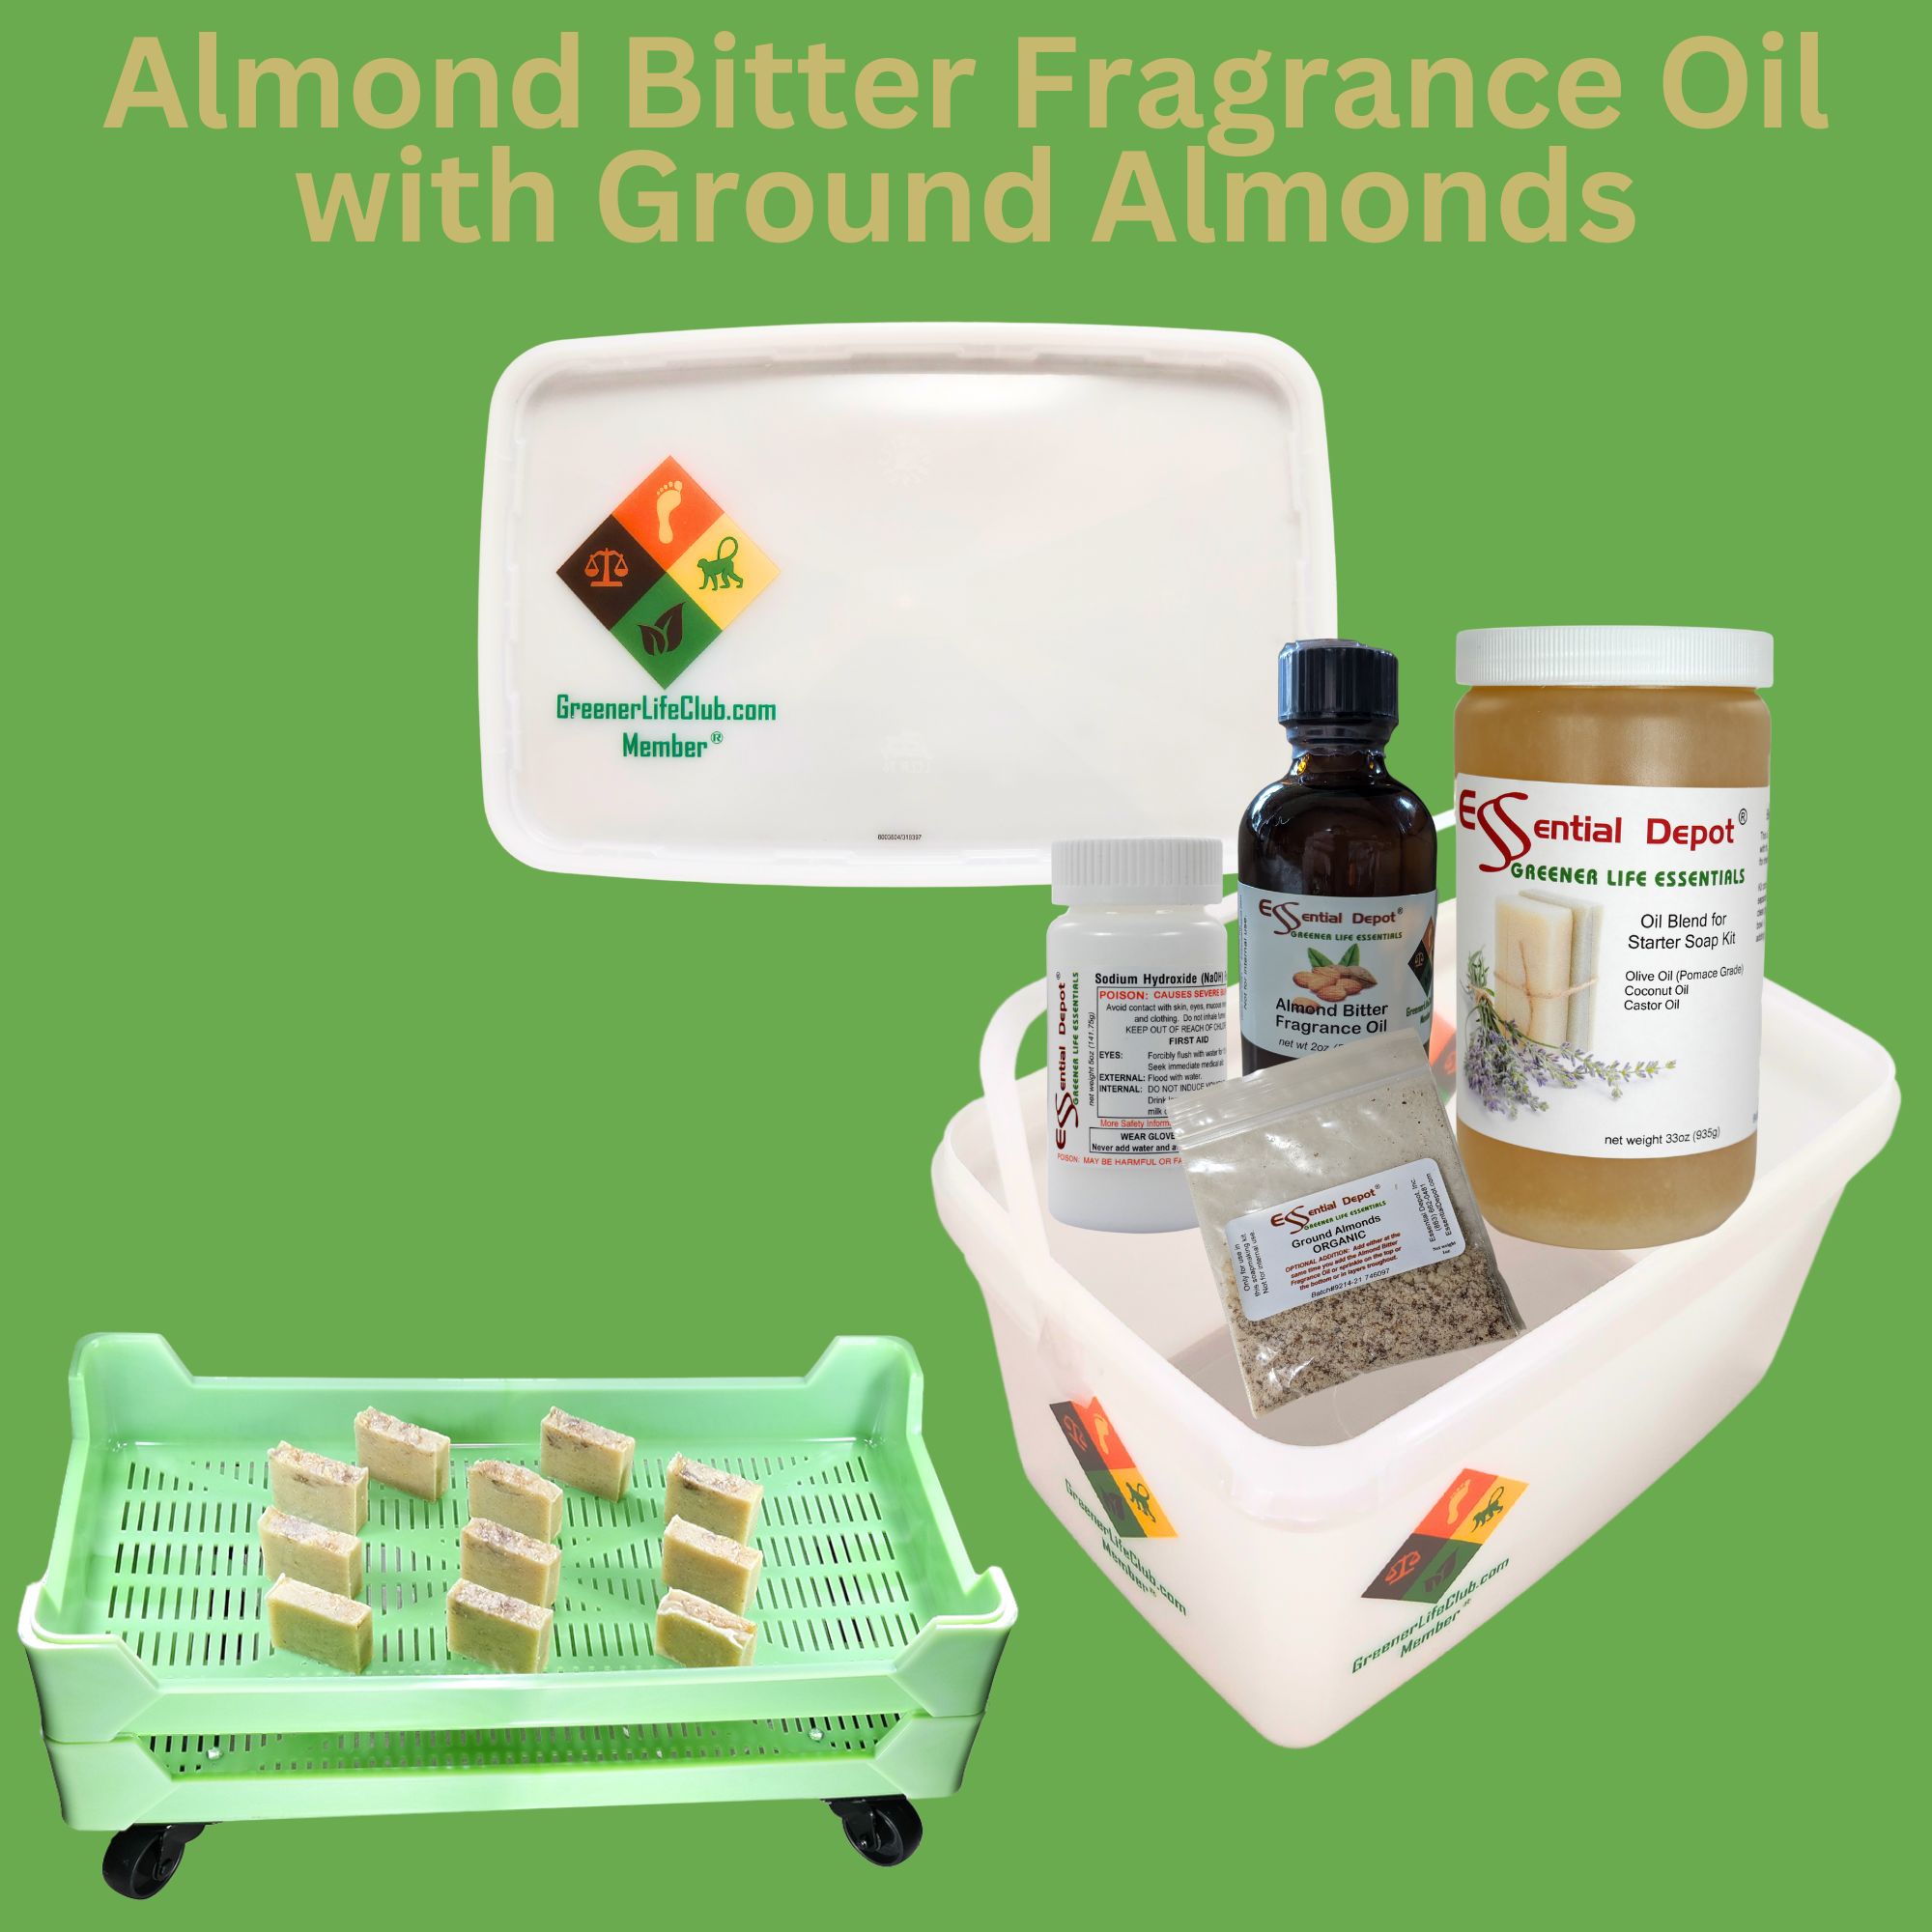 Almond Bitter Fragrance Oil with ground almonds